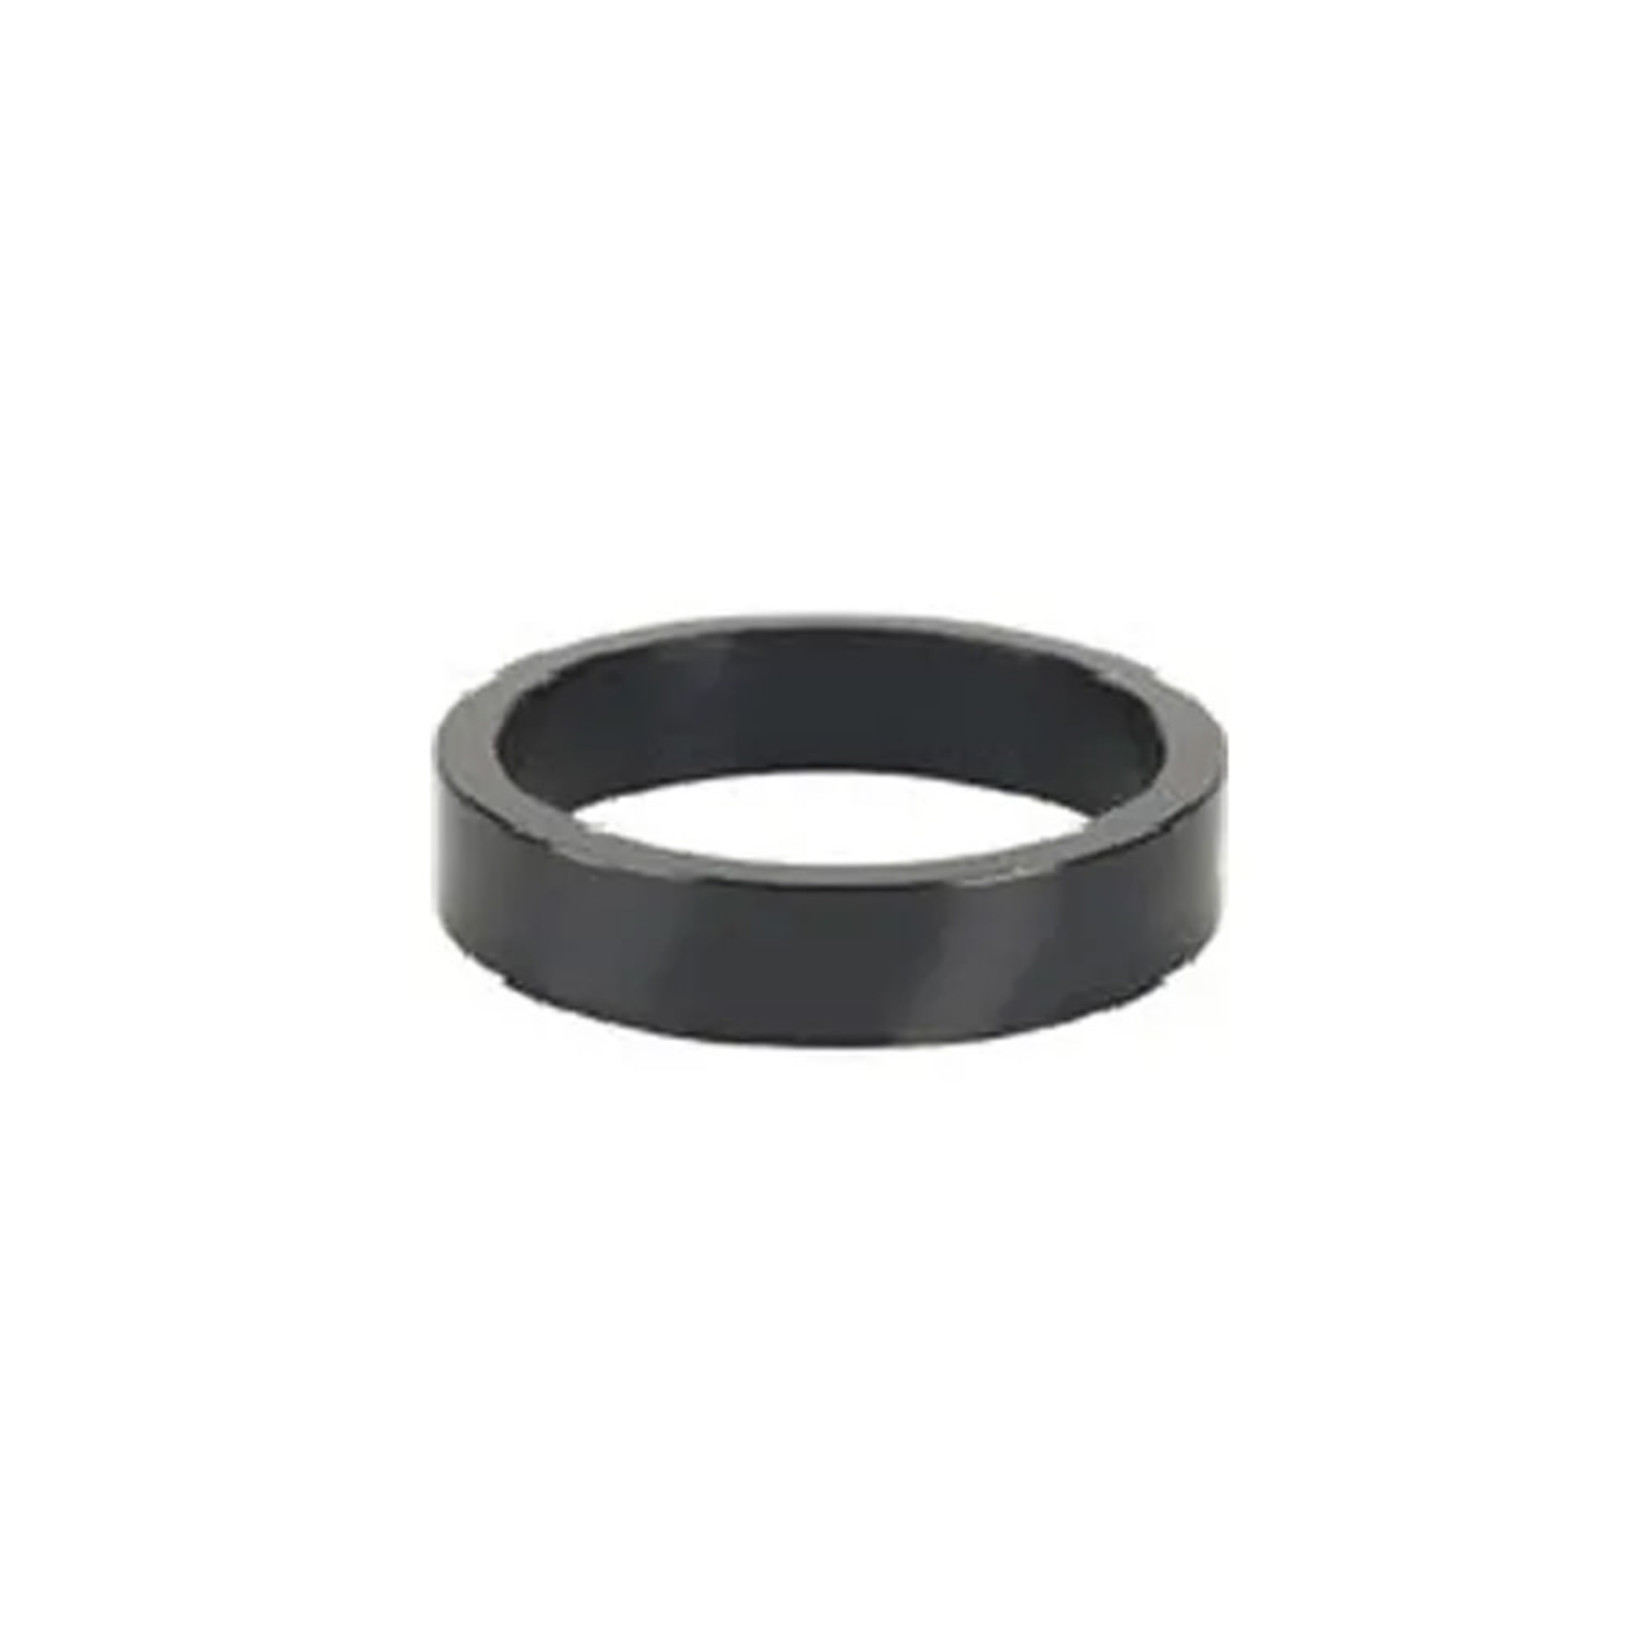 Incomex Trading Pty Ltd BPW Spacer Alloy - 1 1/8 Headset - 15mm - Black